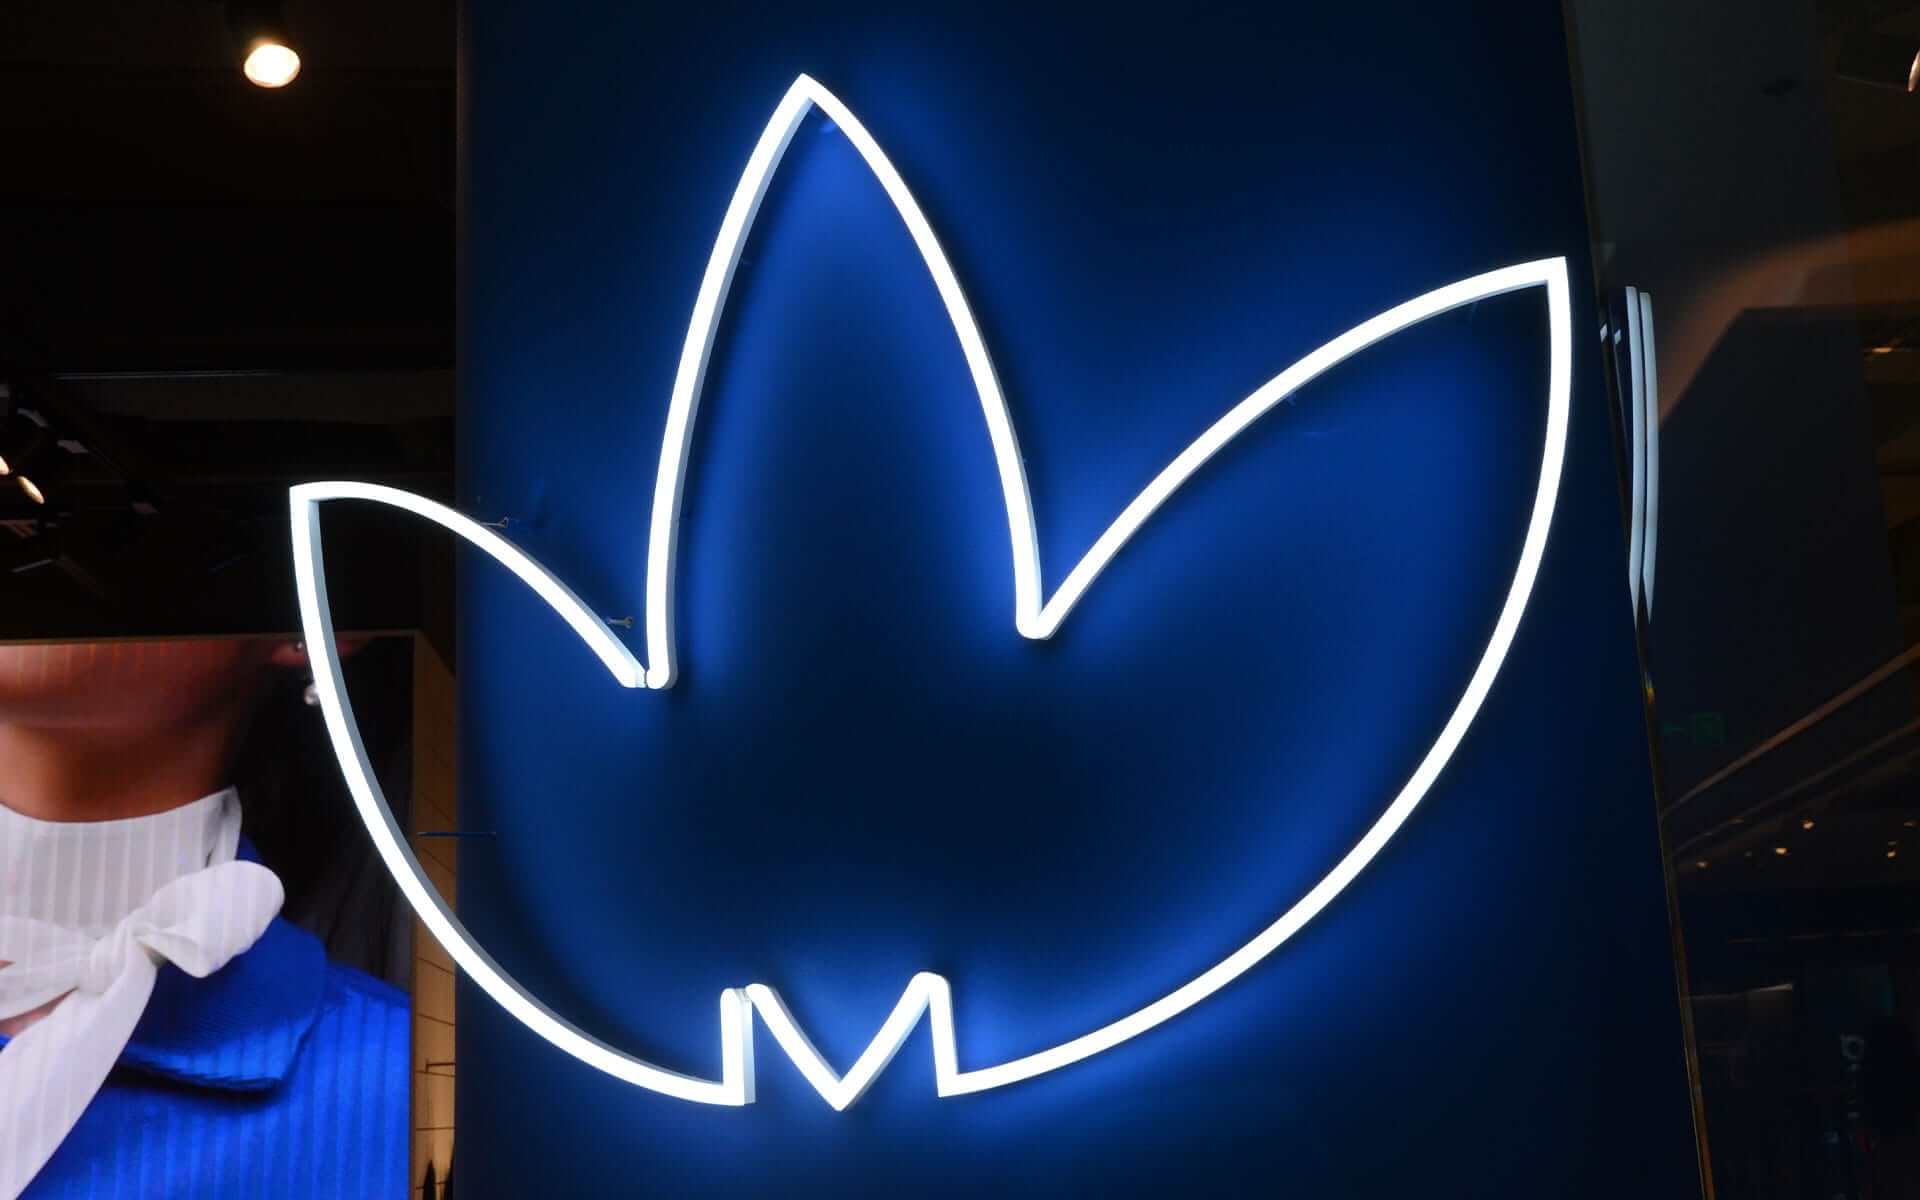 LED Neon Signs